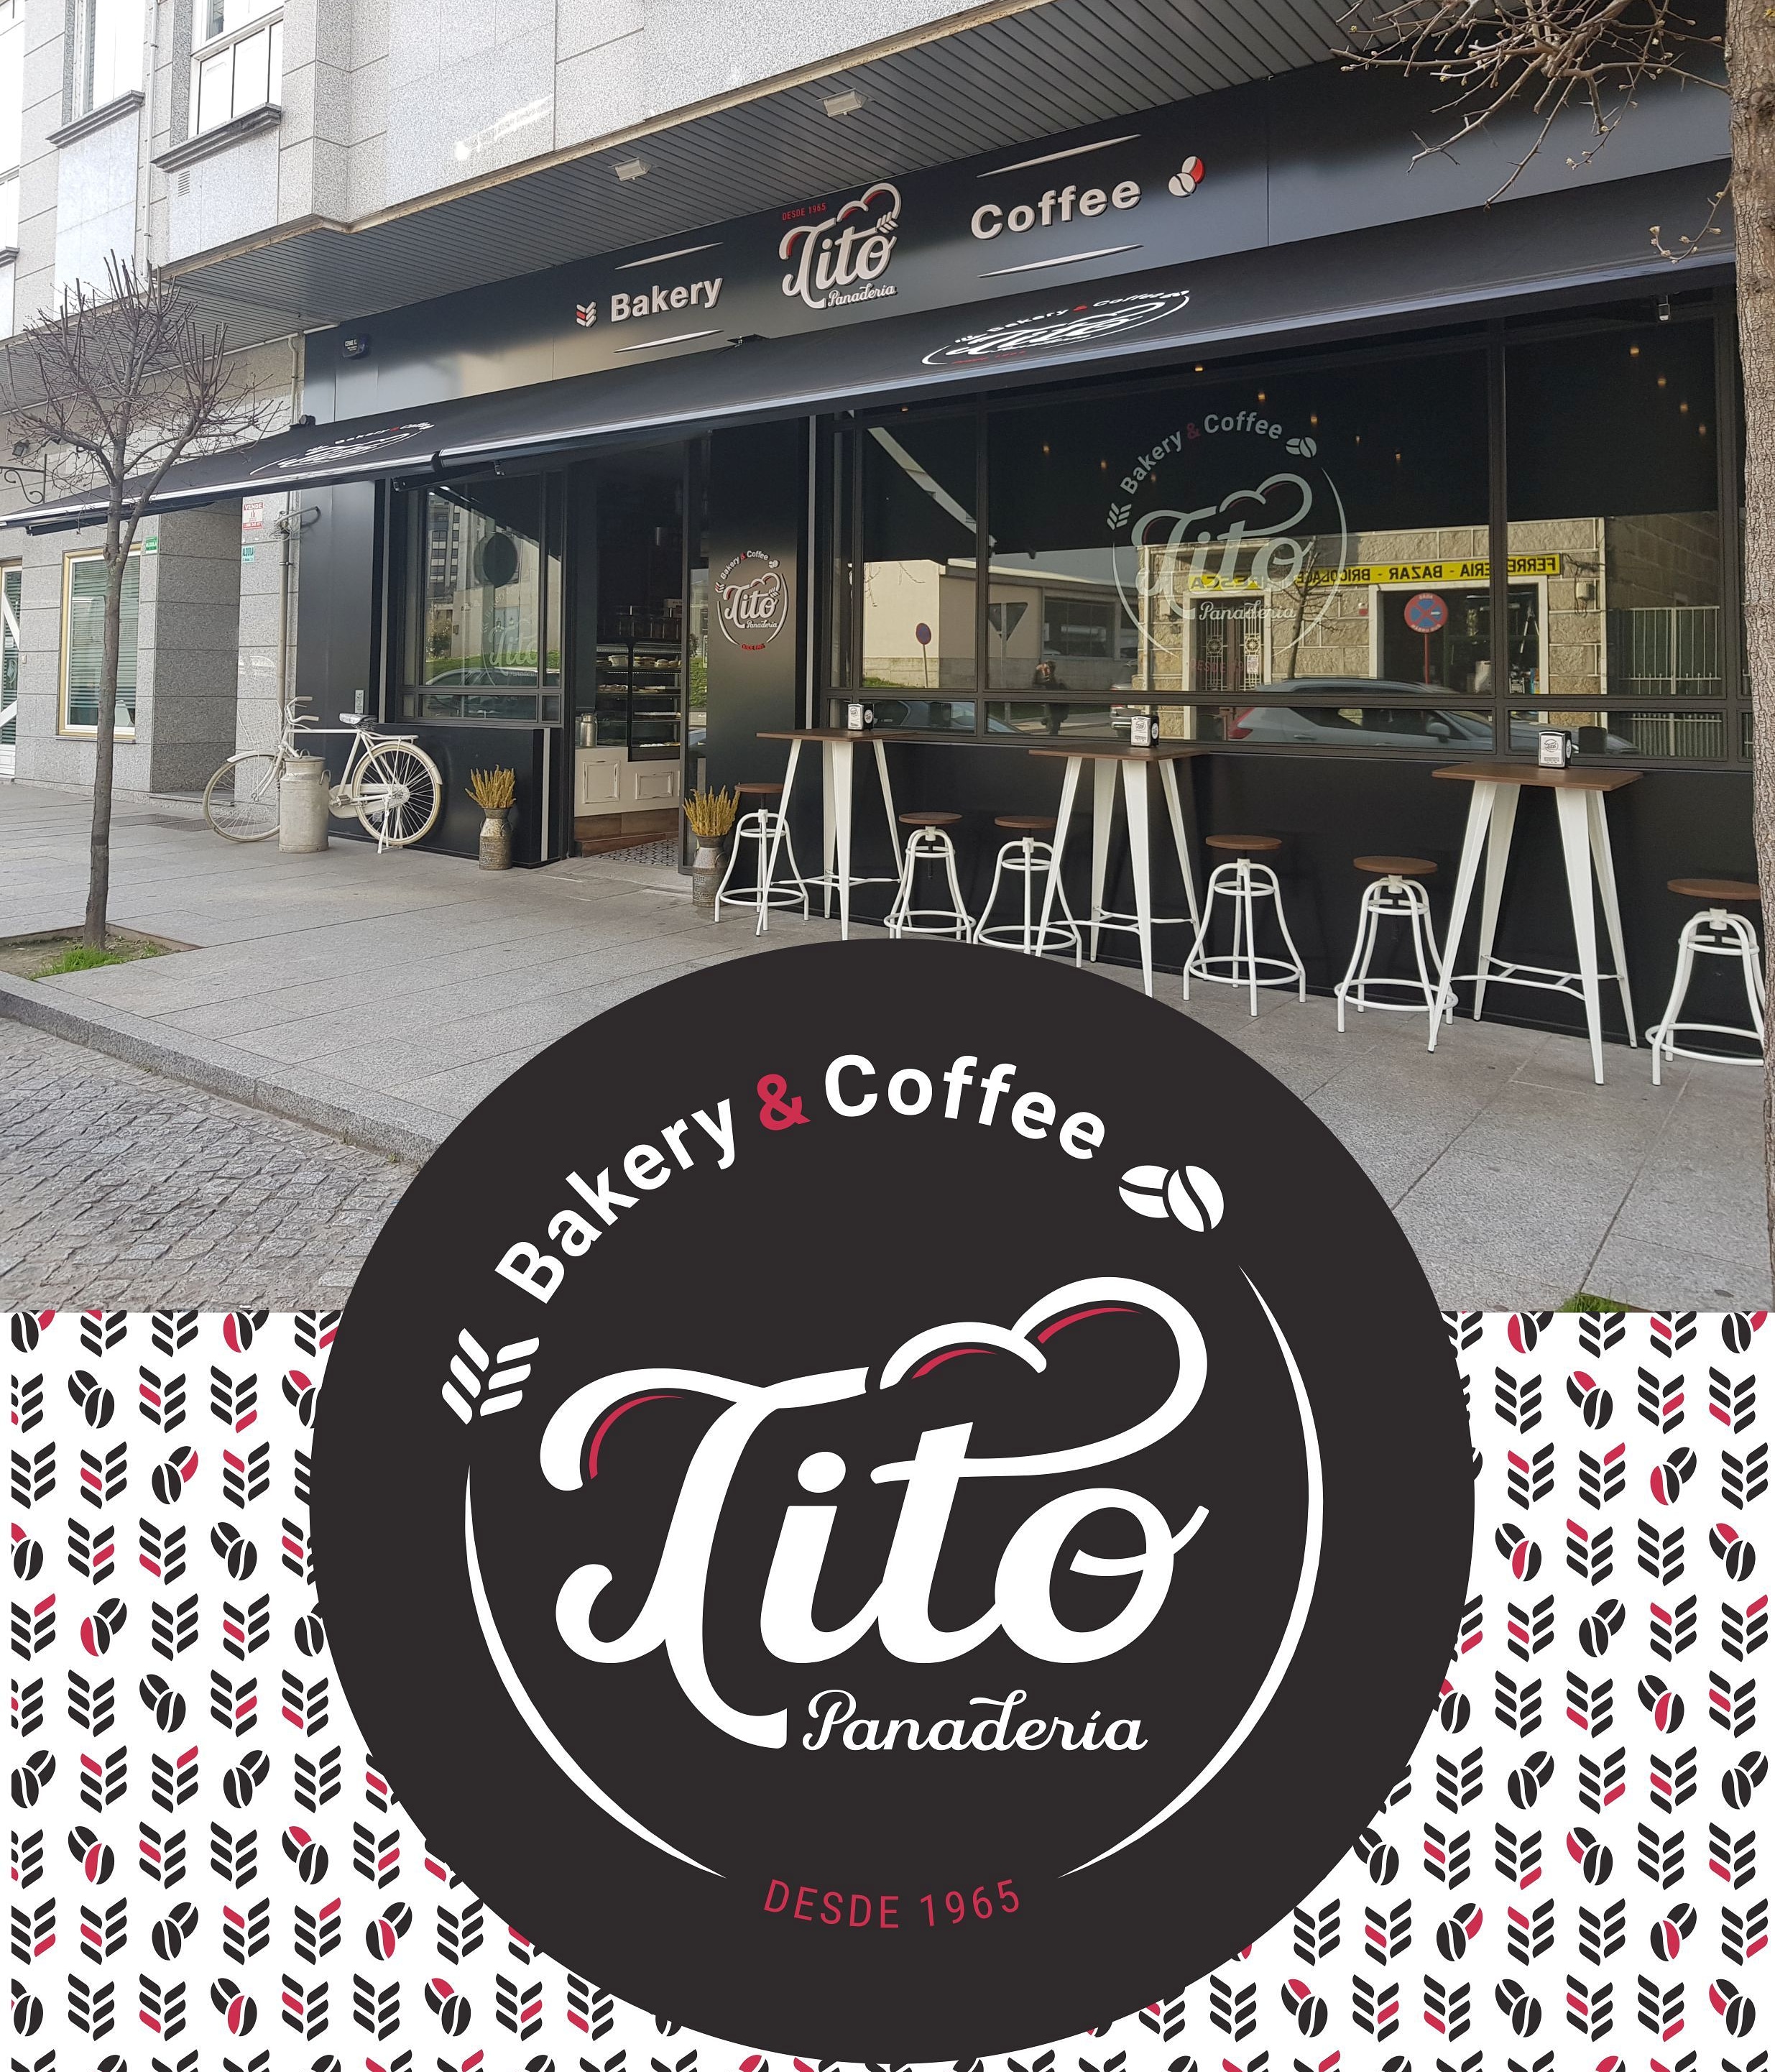 Images Bakery & Coffee Tito